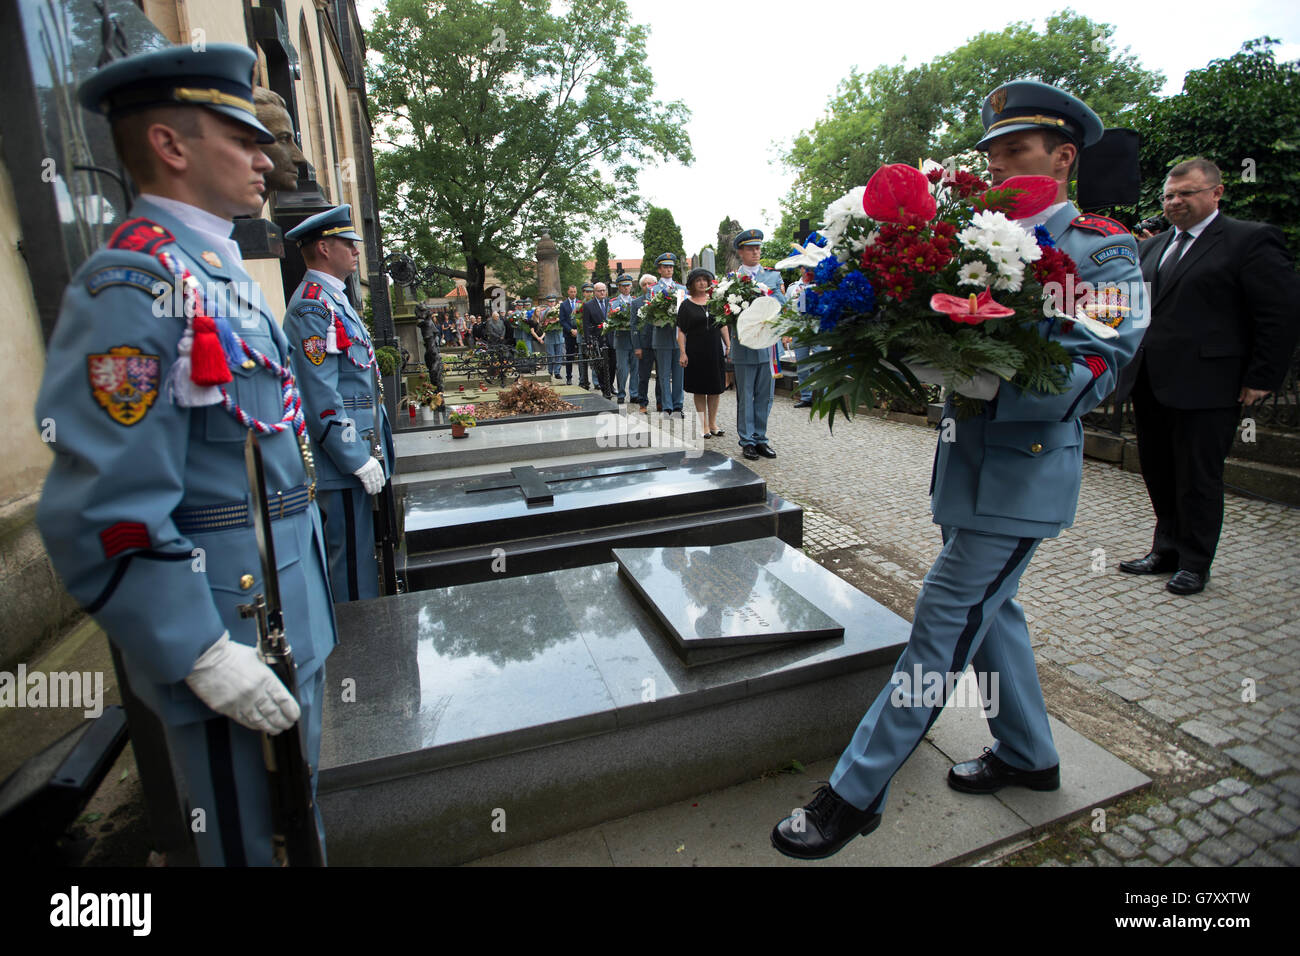 Prague, Czech Republic. 26th June, 2016. A commemorative act was held at the symbolical grave of Milada Horakova, a Czechoslovak democratic politician executed after a show trial in 1950, at a cemetery in Prague, Czech Republic, June 26, 2016. © Michal Kamaryt/CTK Photo/Alamy Live News Stock Photo